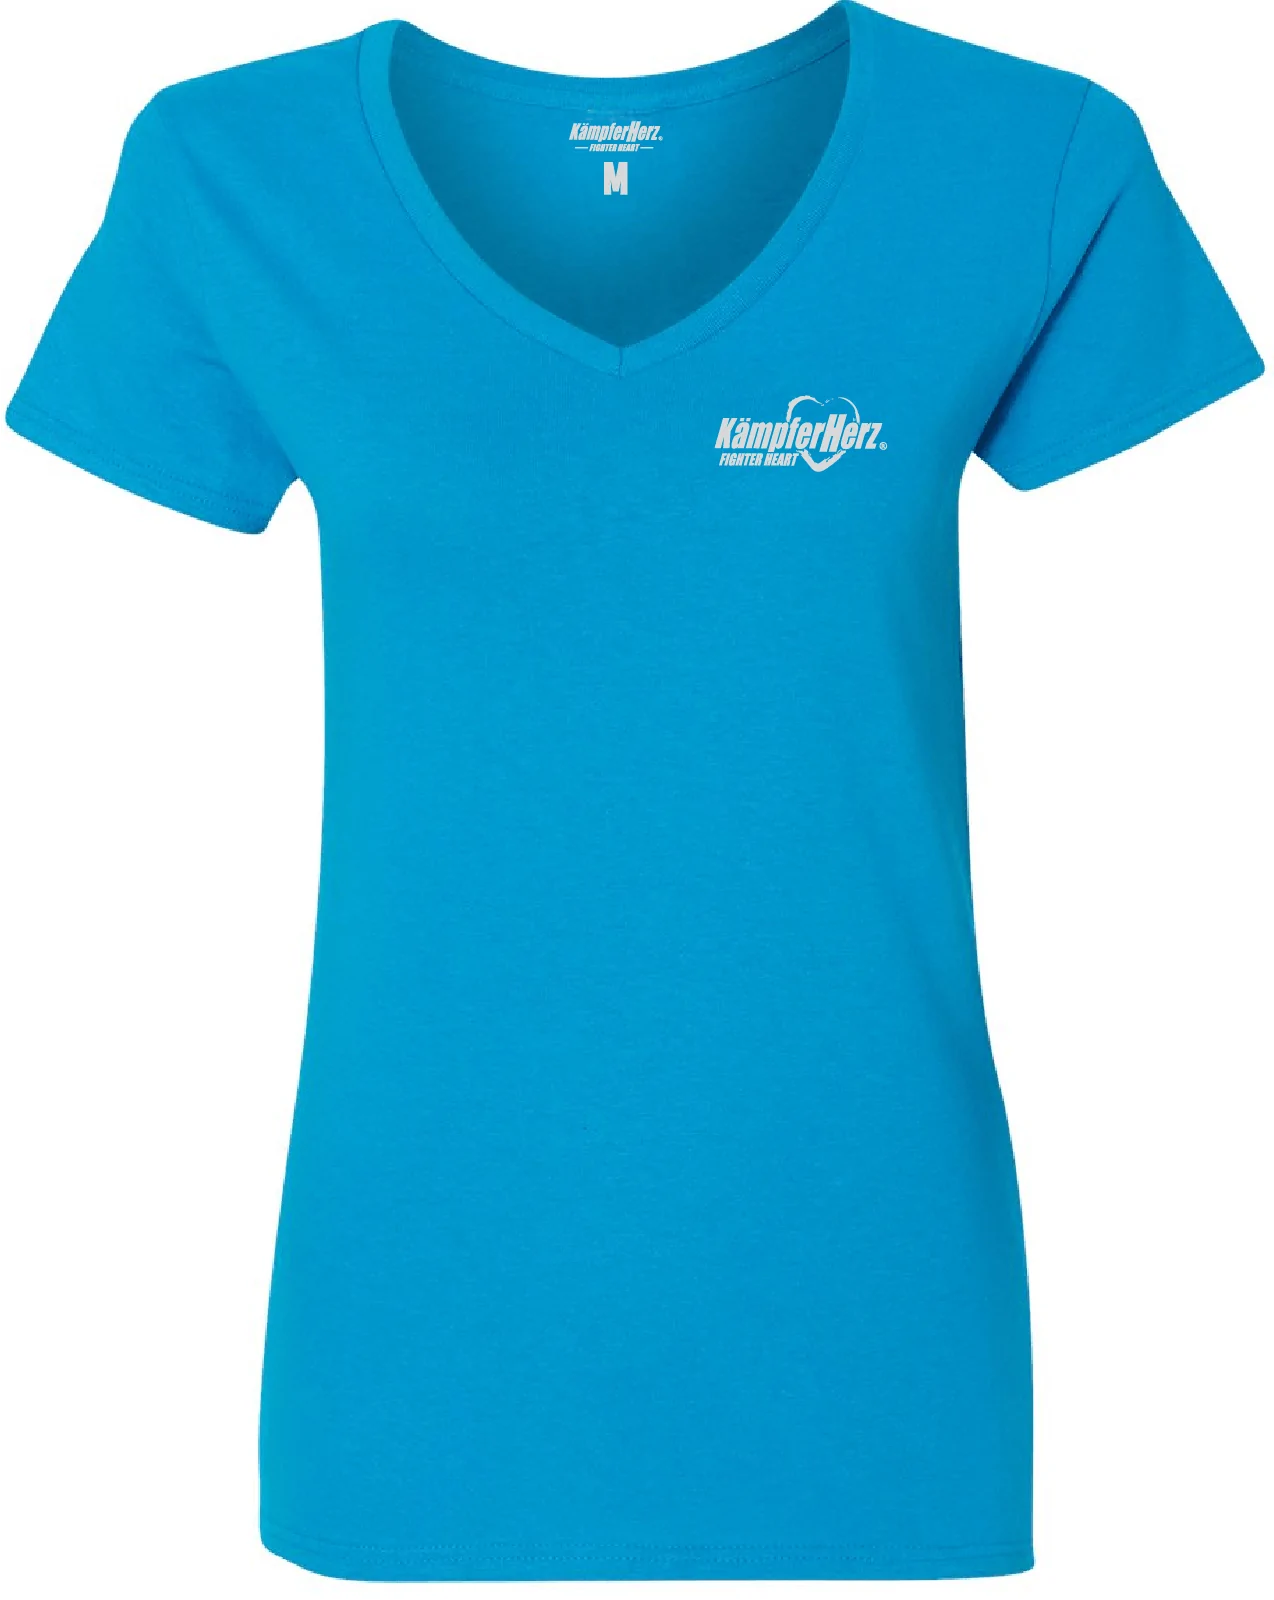 Ladies V-Neck Shirt - limited edition (KHFH)